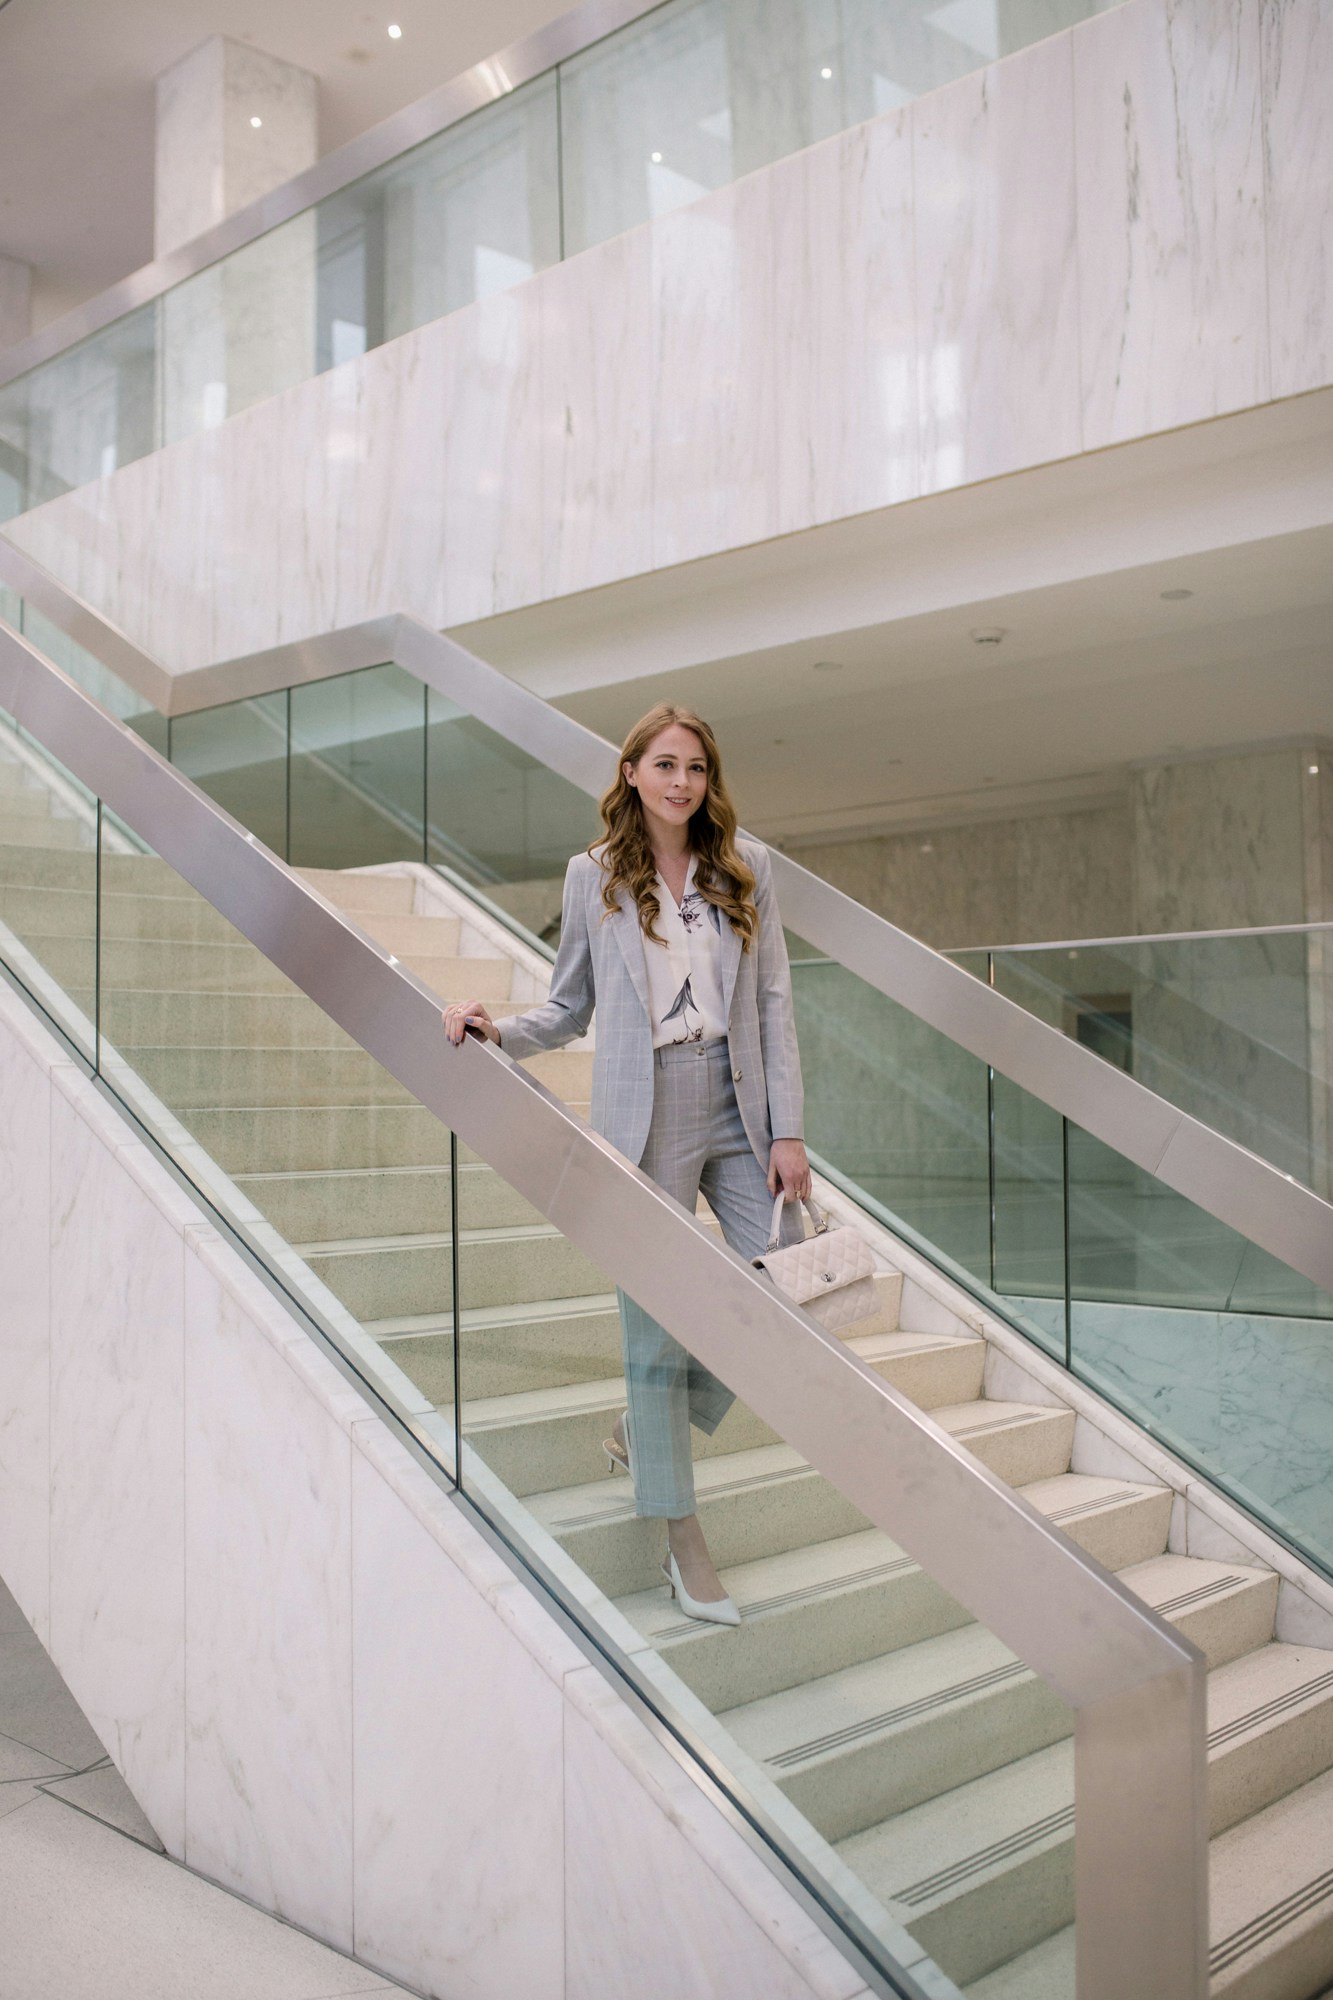 Chic grey suit for corporate work environment. Dressing for the office can be a challenge, but a sleek classic suit in a modern cut is easy to wear. This grey plaid suit from Le Chateau is easy to dress up or down. 